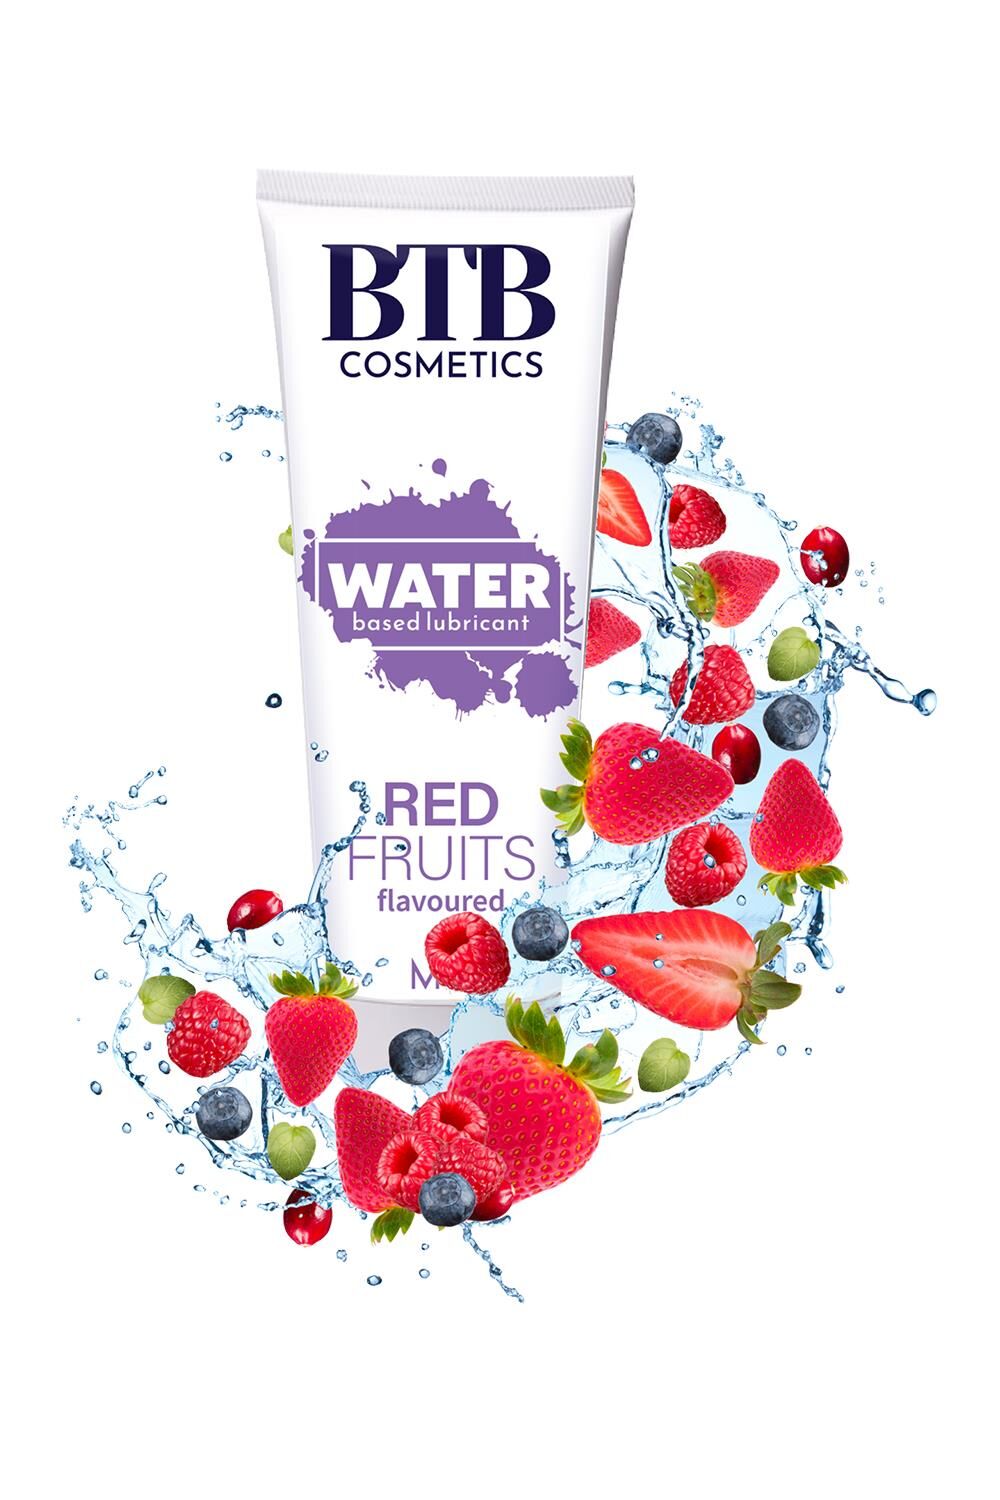     BTB FLAVORED RED FRUITS